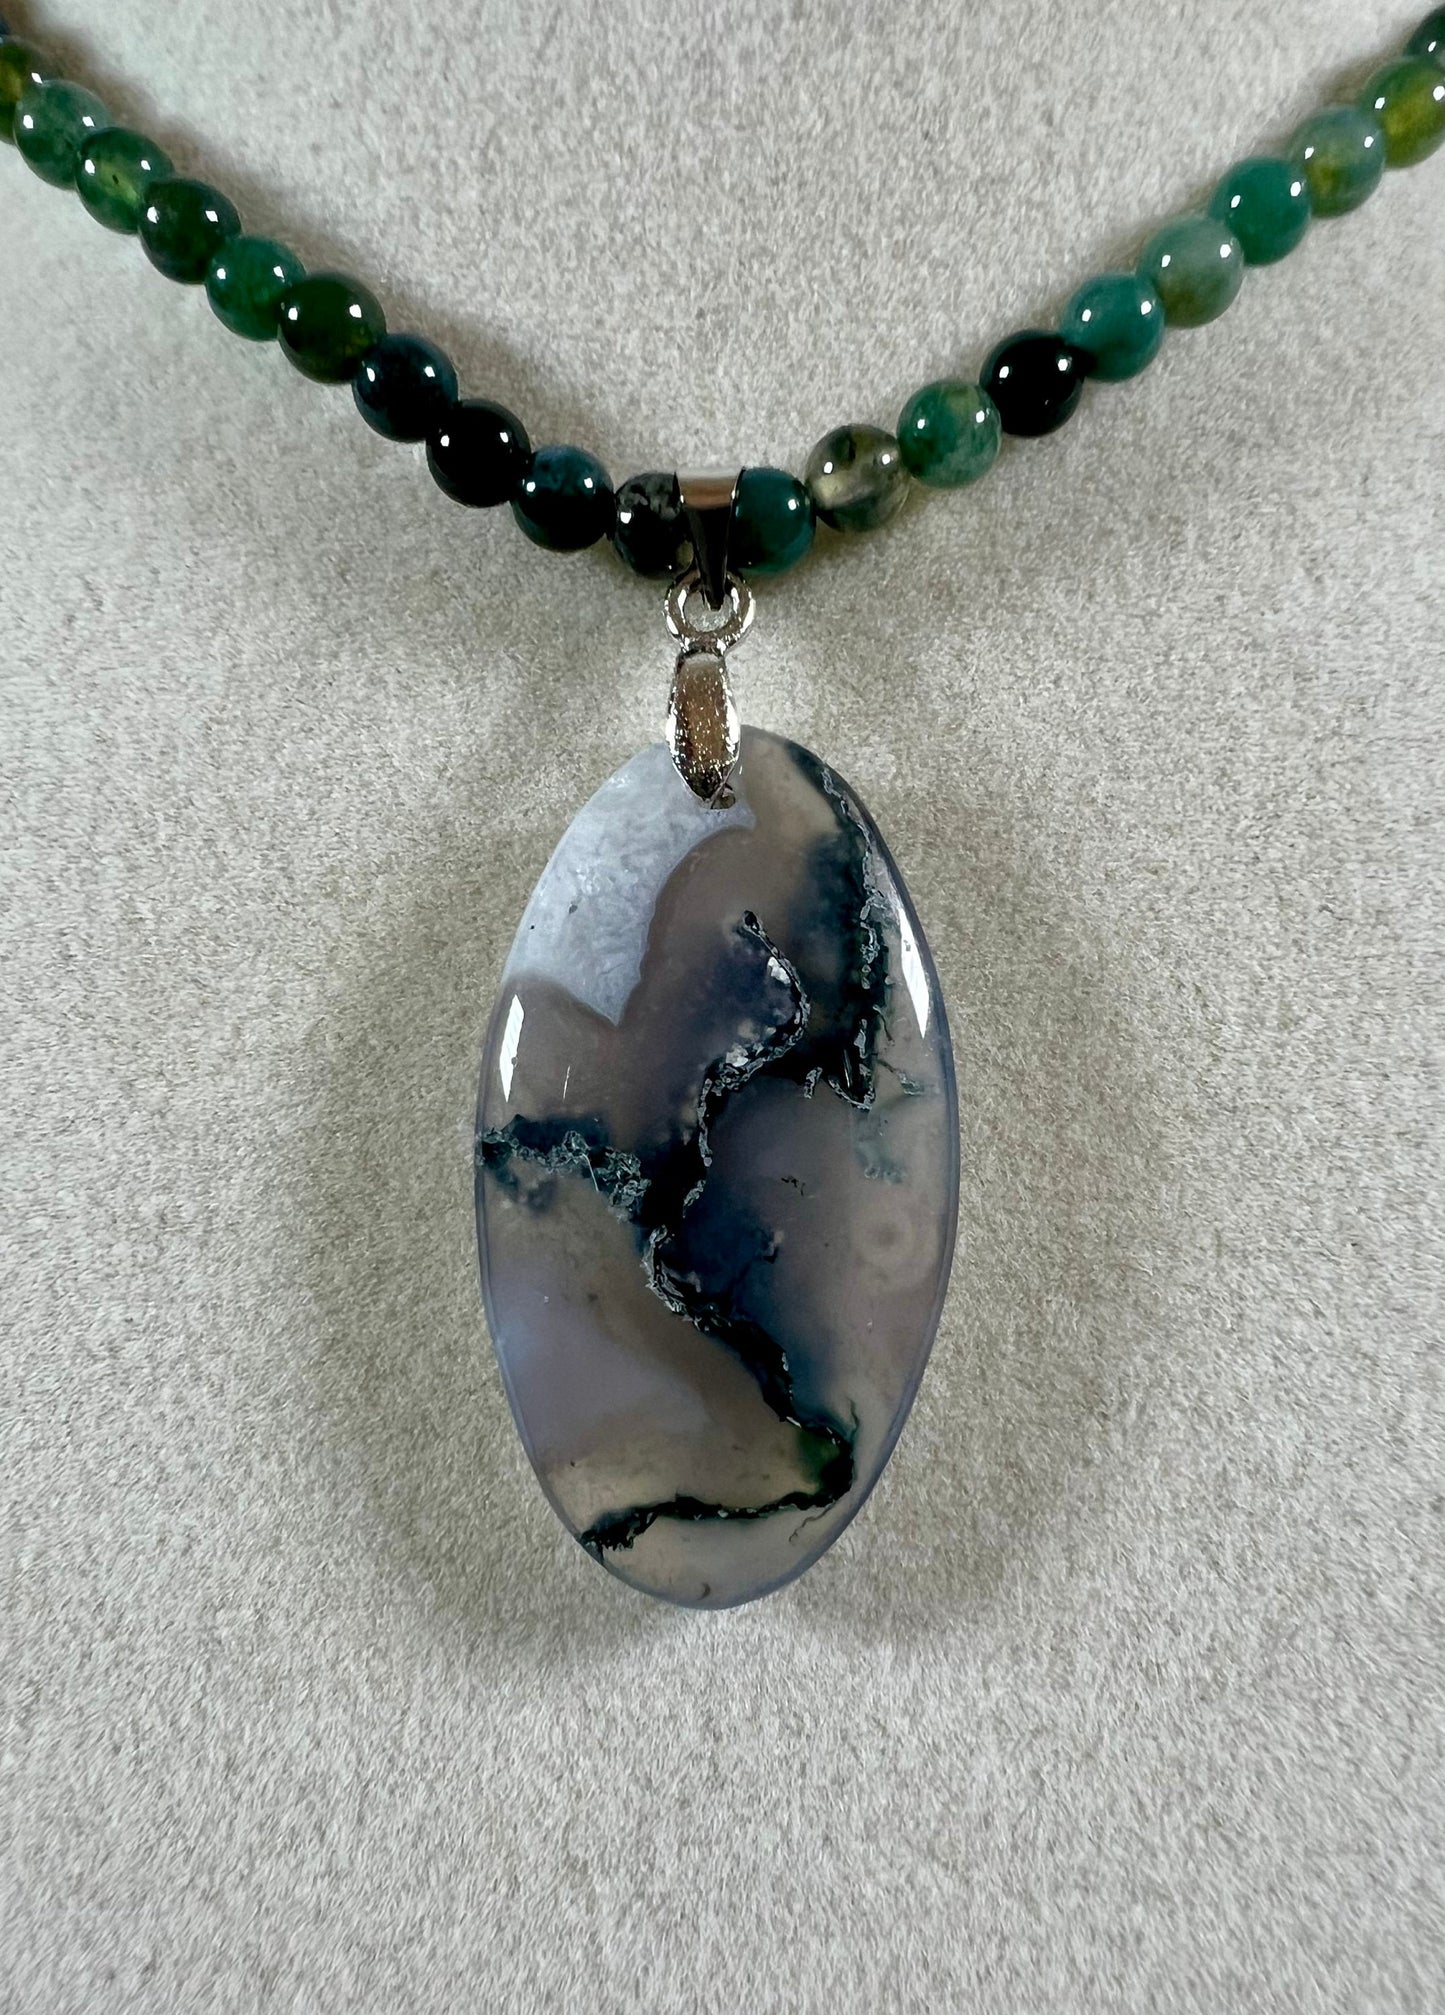 High Quality Moss Agate Pendant. Custom Made Moss Agate Beaded Necklace. Beautiful Crystal Necklace